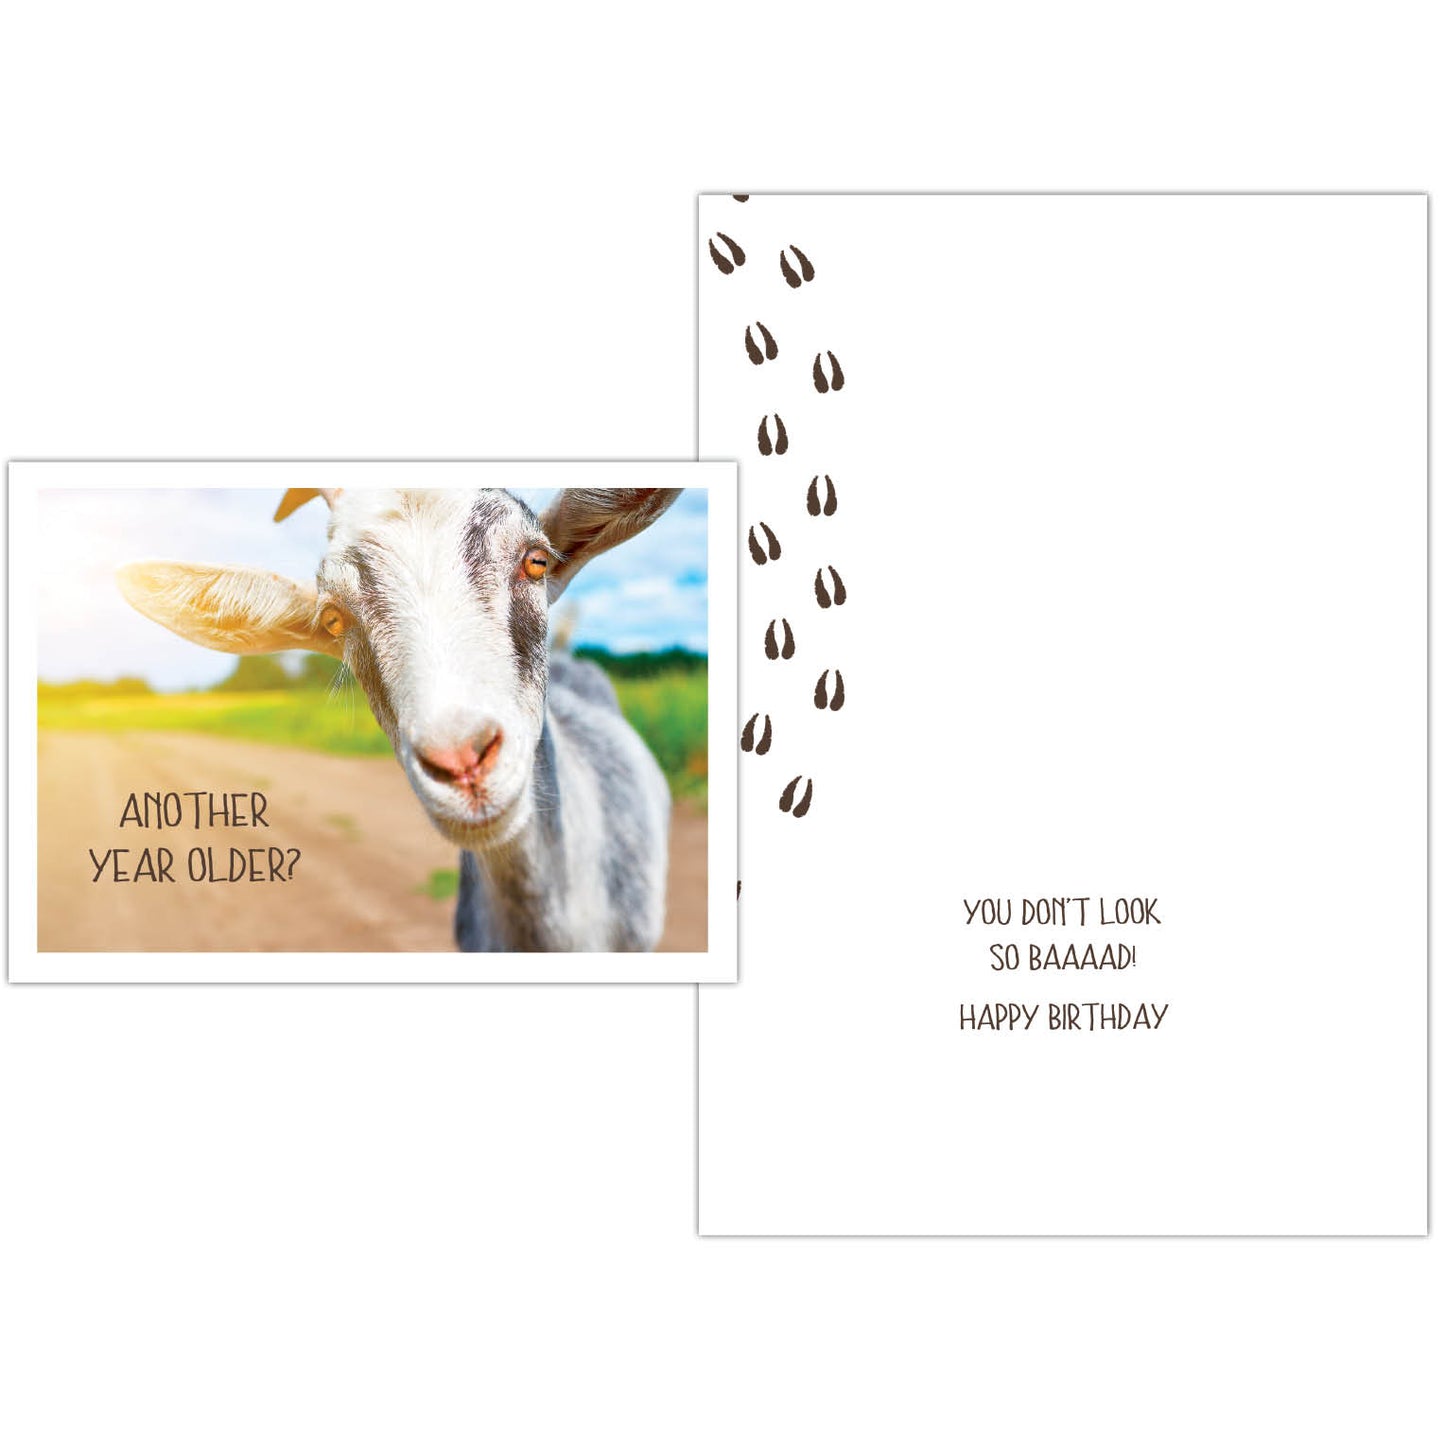 Individual birthday card with a goat on the front